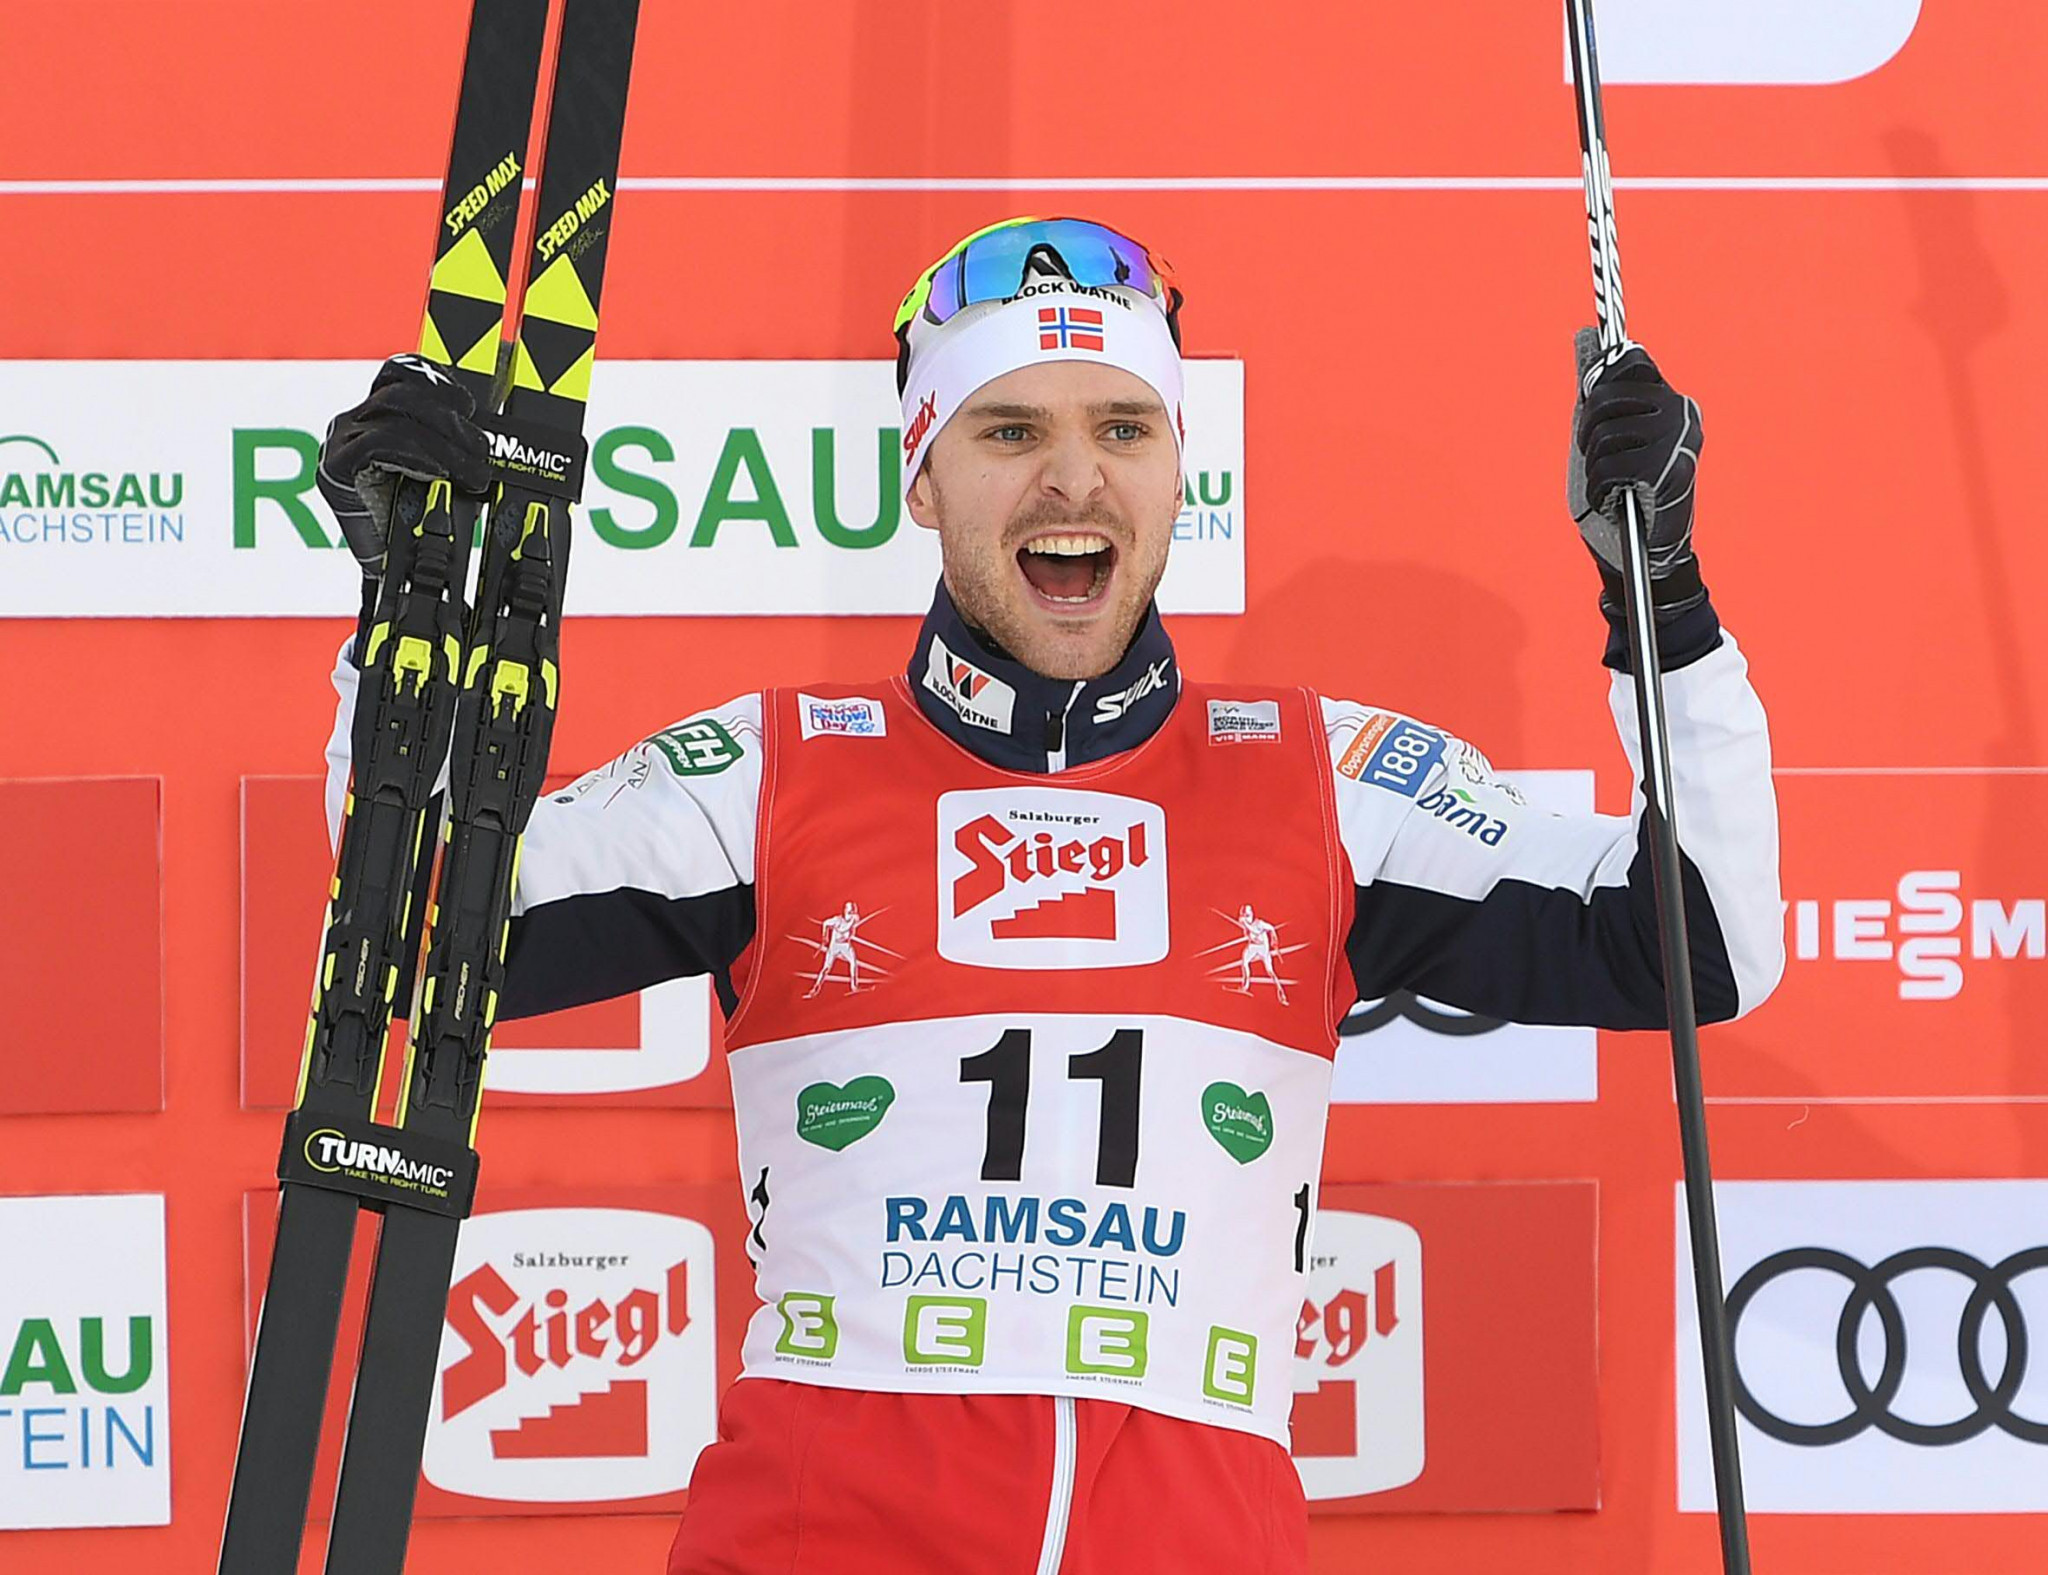 Jørgen Graabak claimed victory in Ramsau today with a sprint finish ©Getty Images